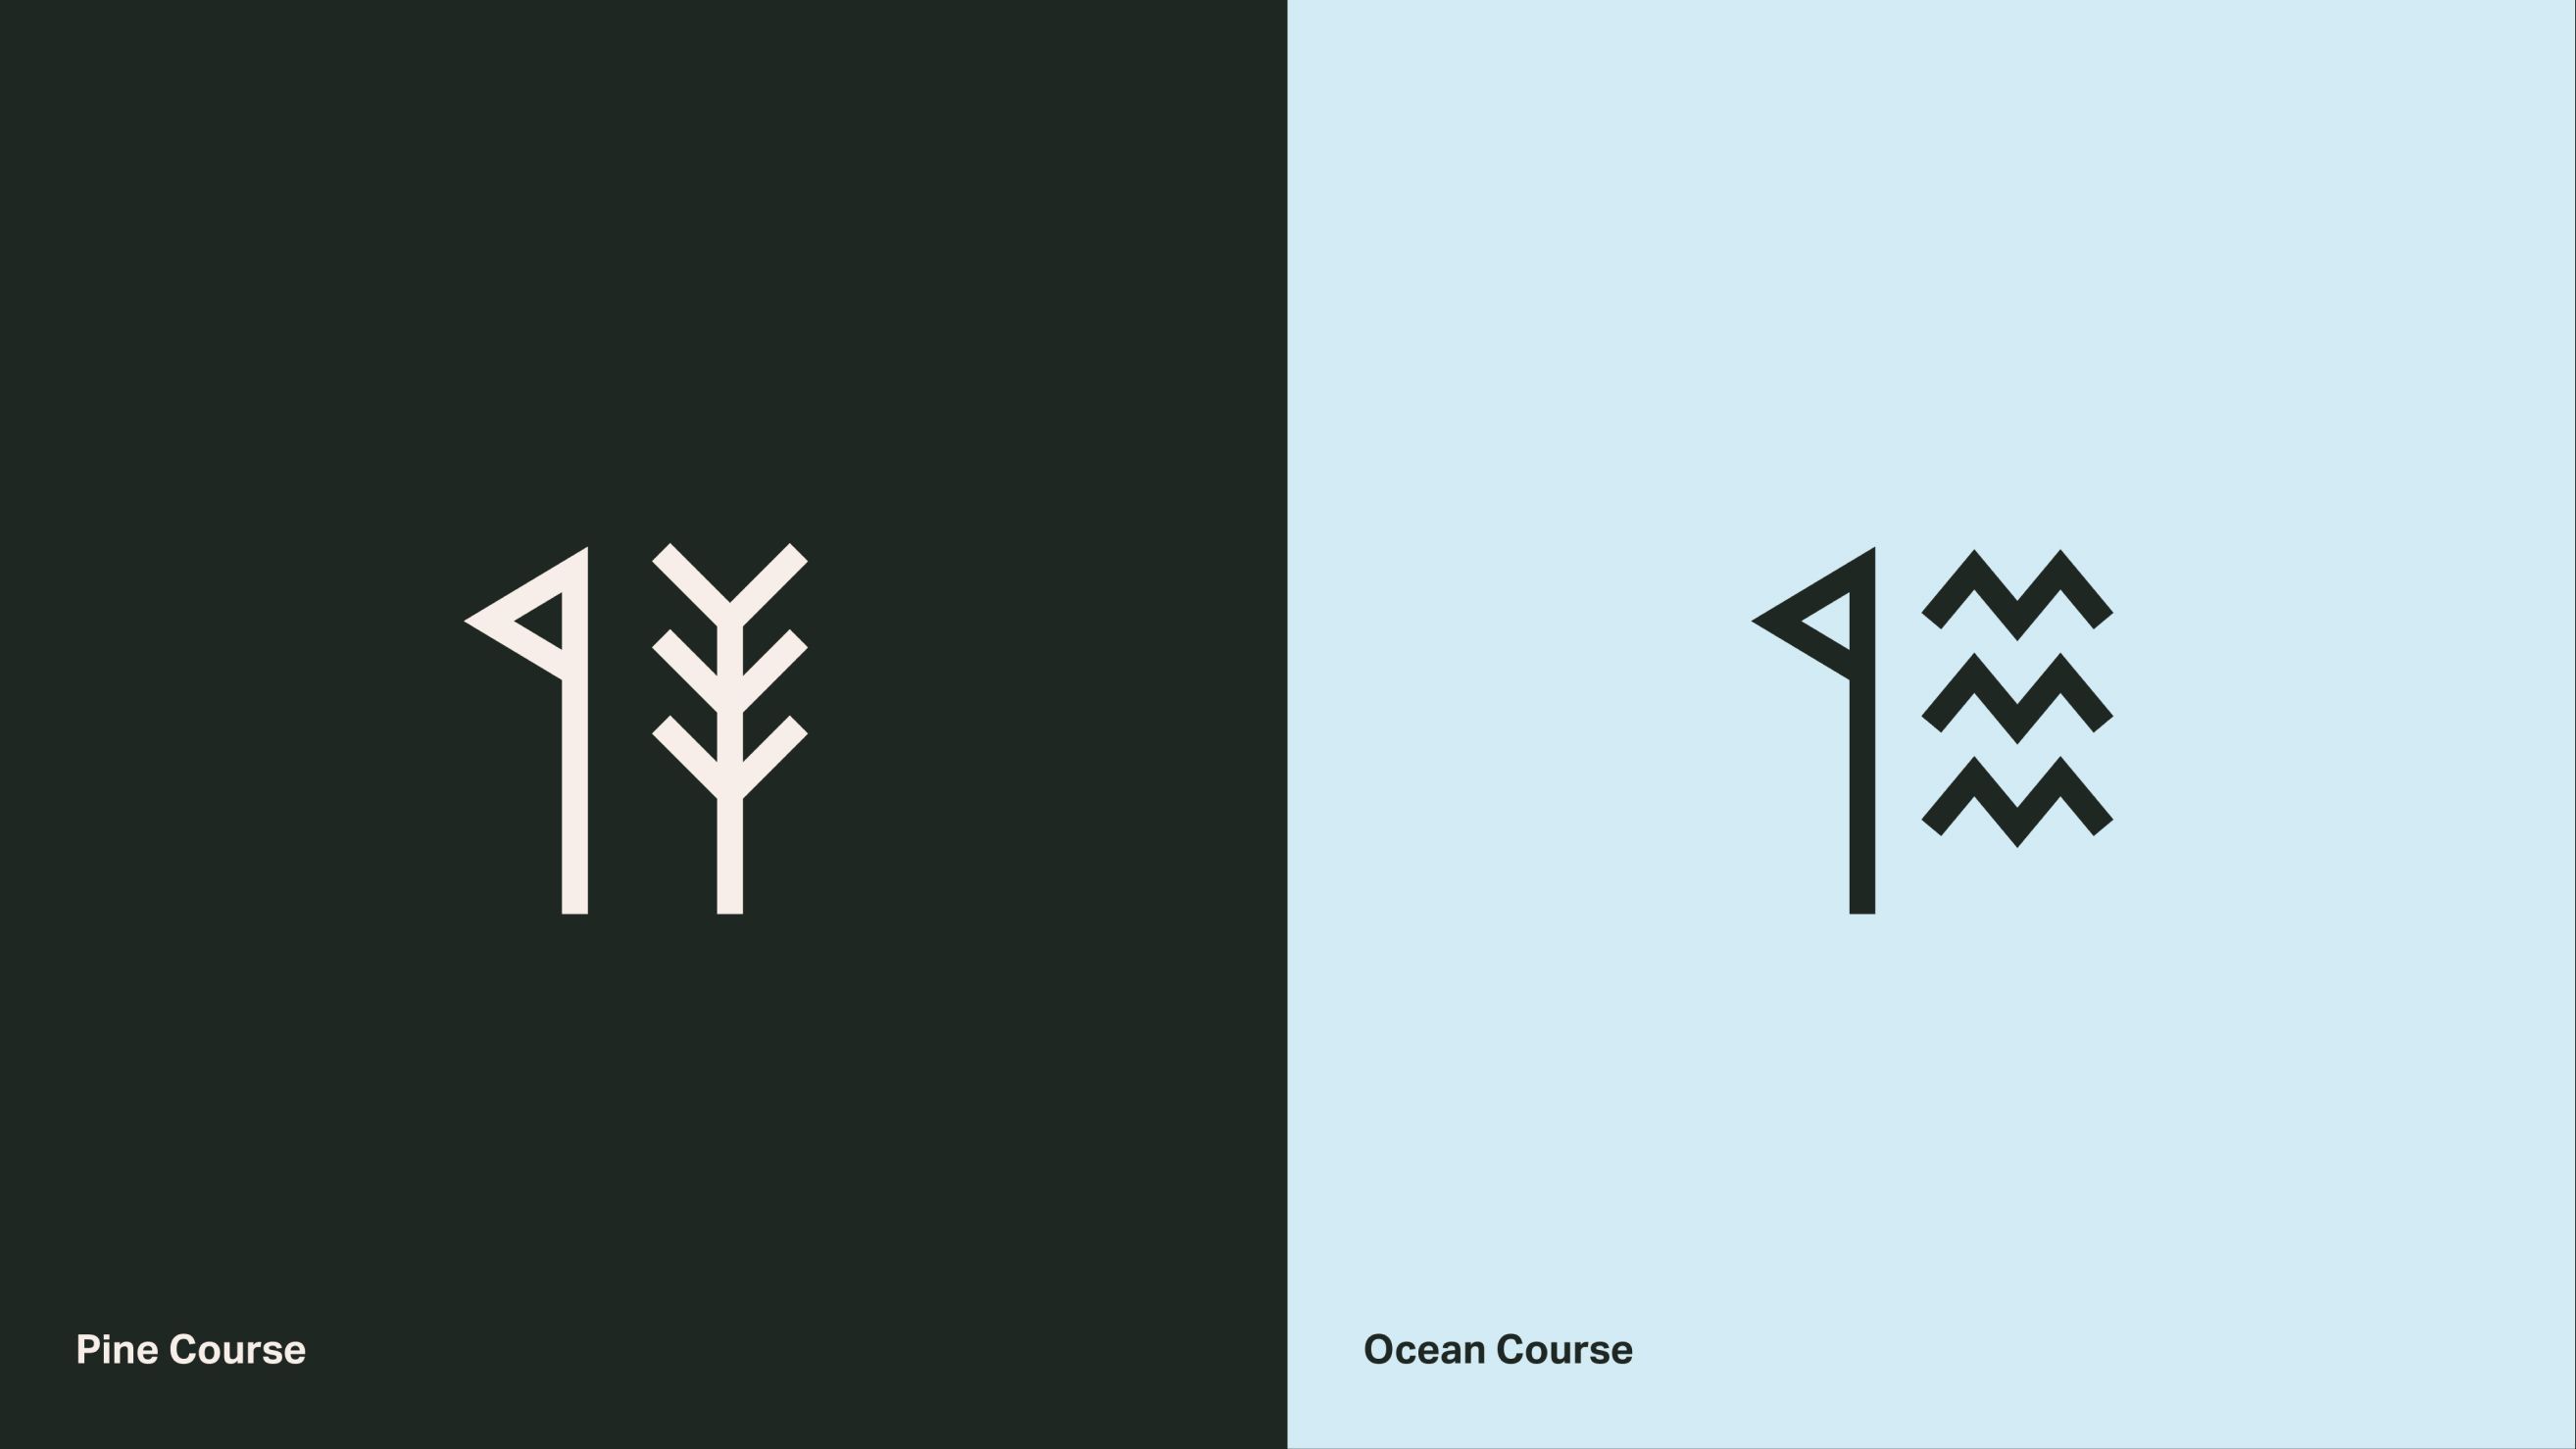 Symbols for pine course and seaside course.